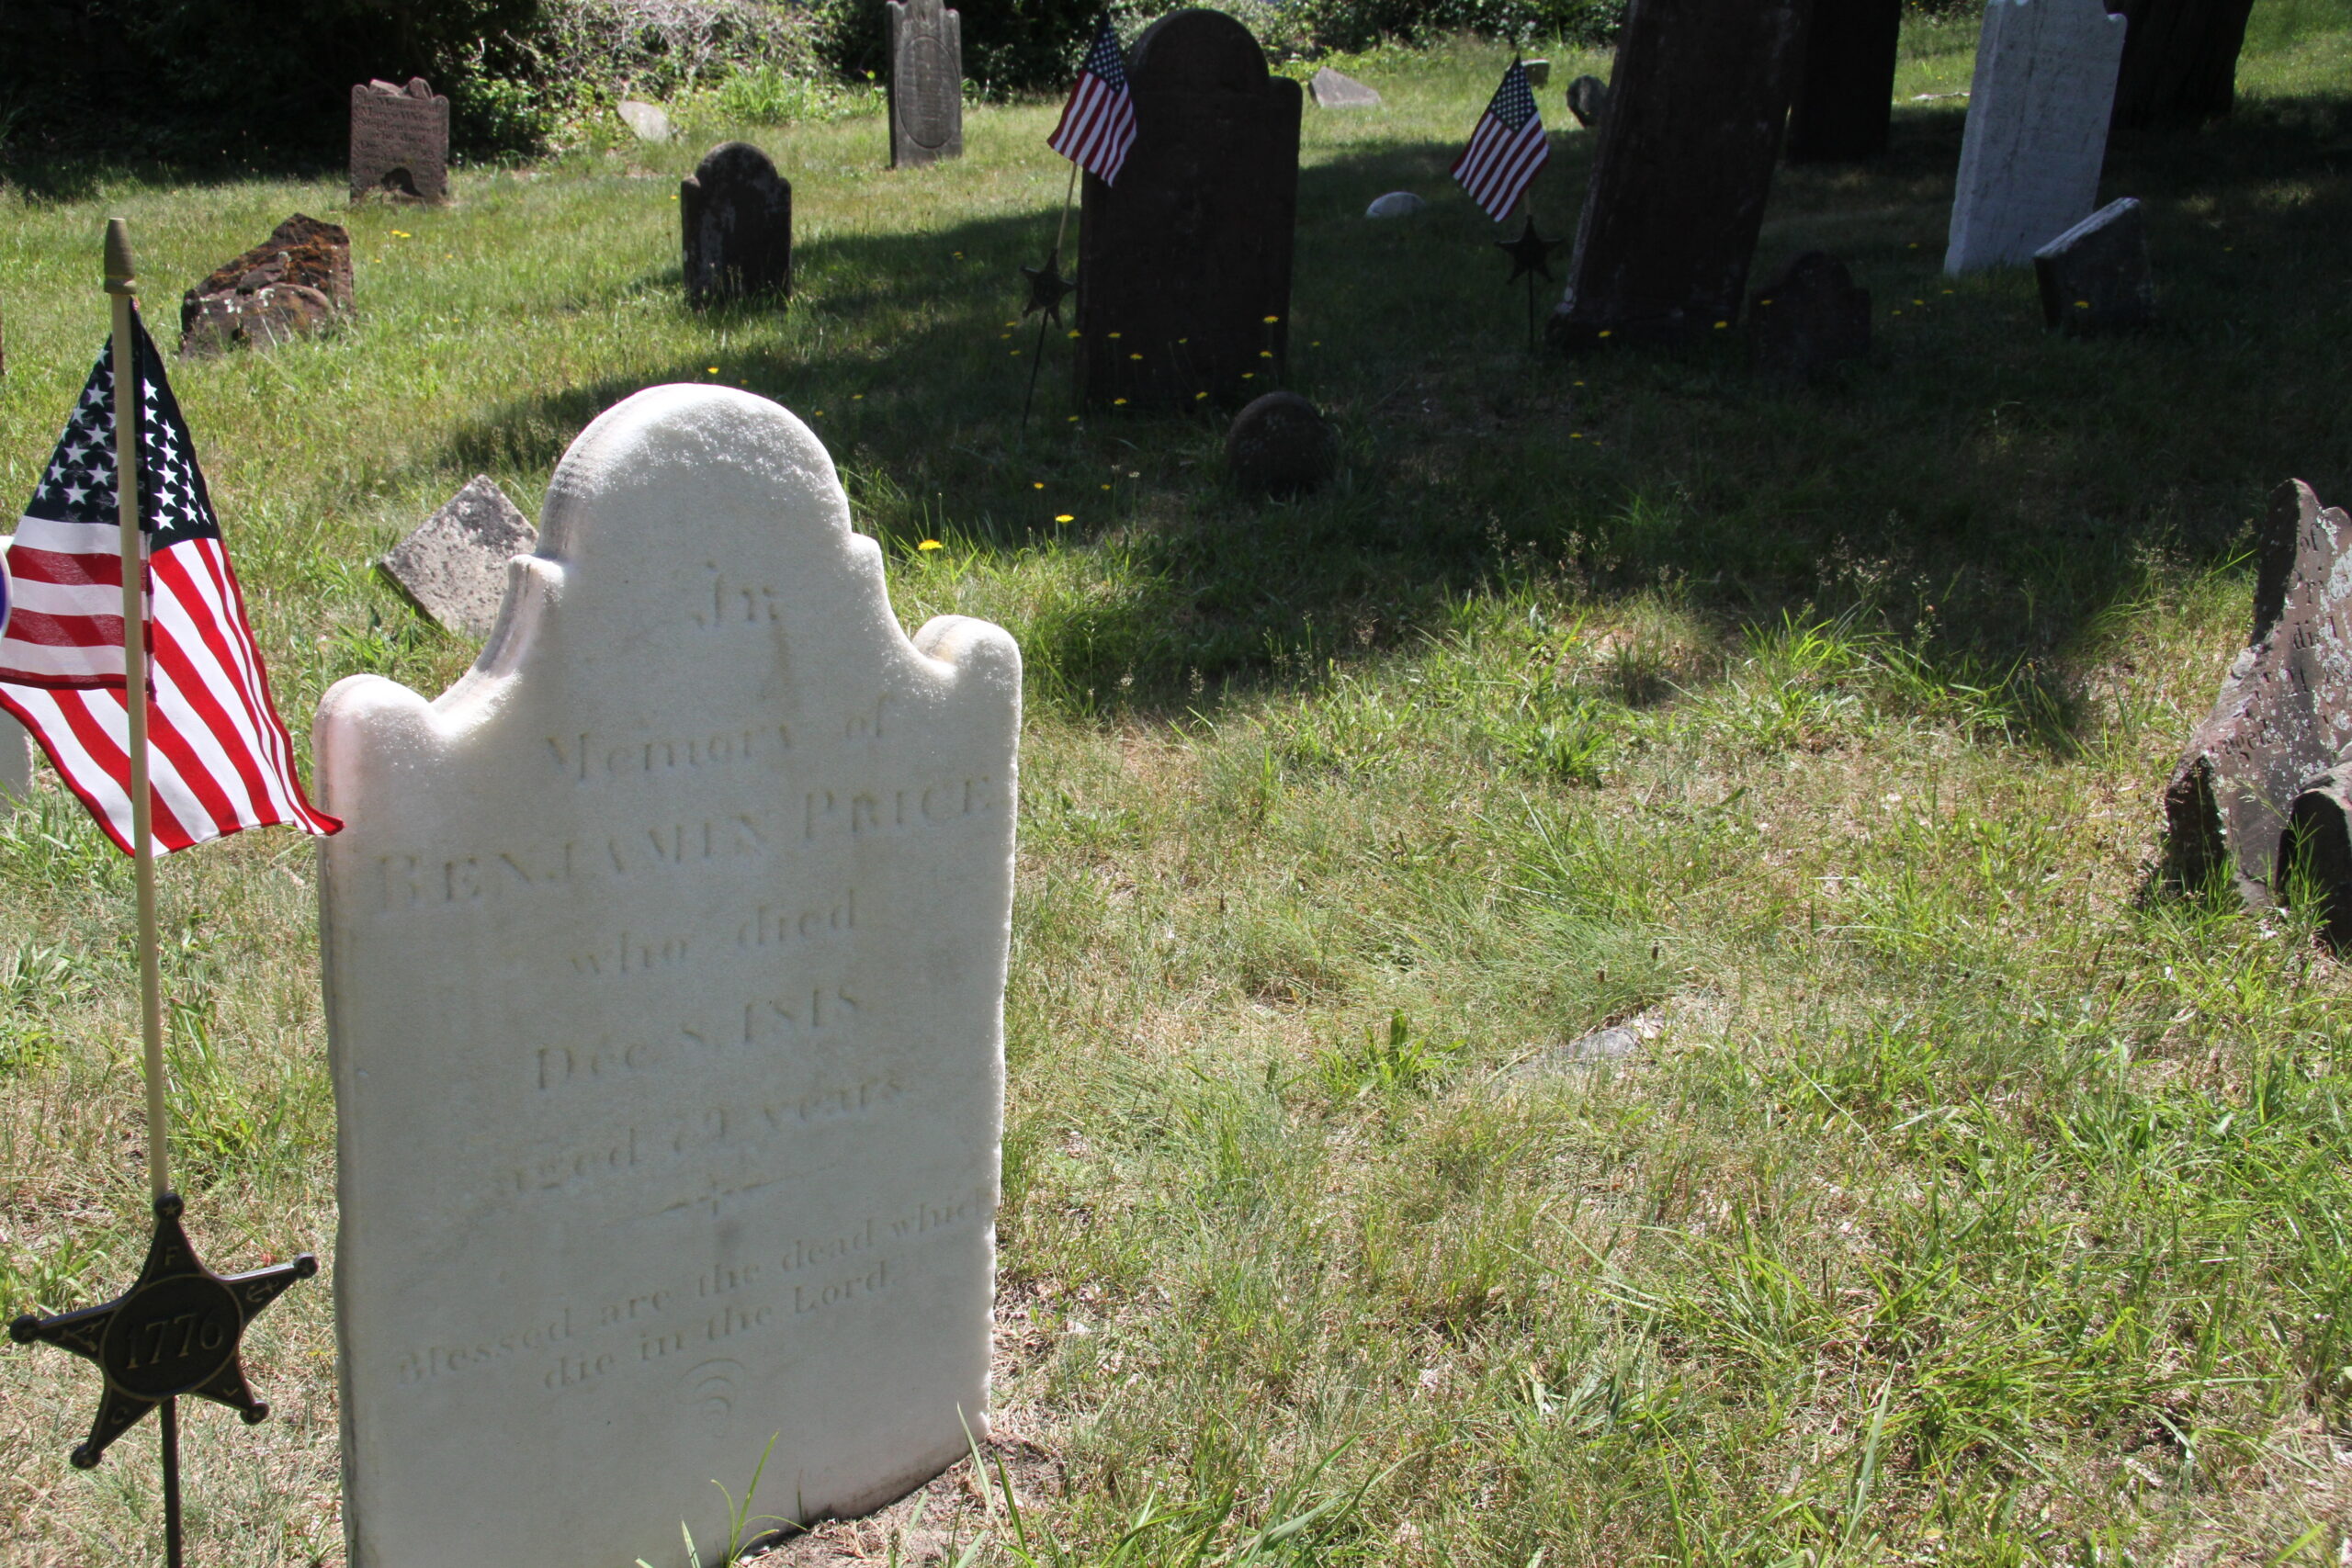 One of the 22 graves of confirmed patriots buried at the Old Burying Ground in Sag Harbor.